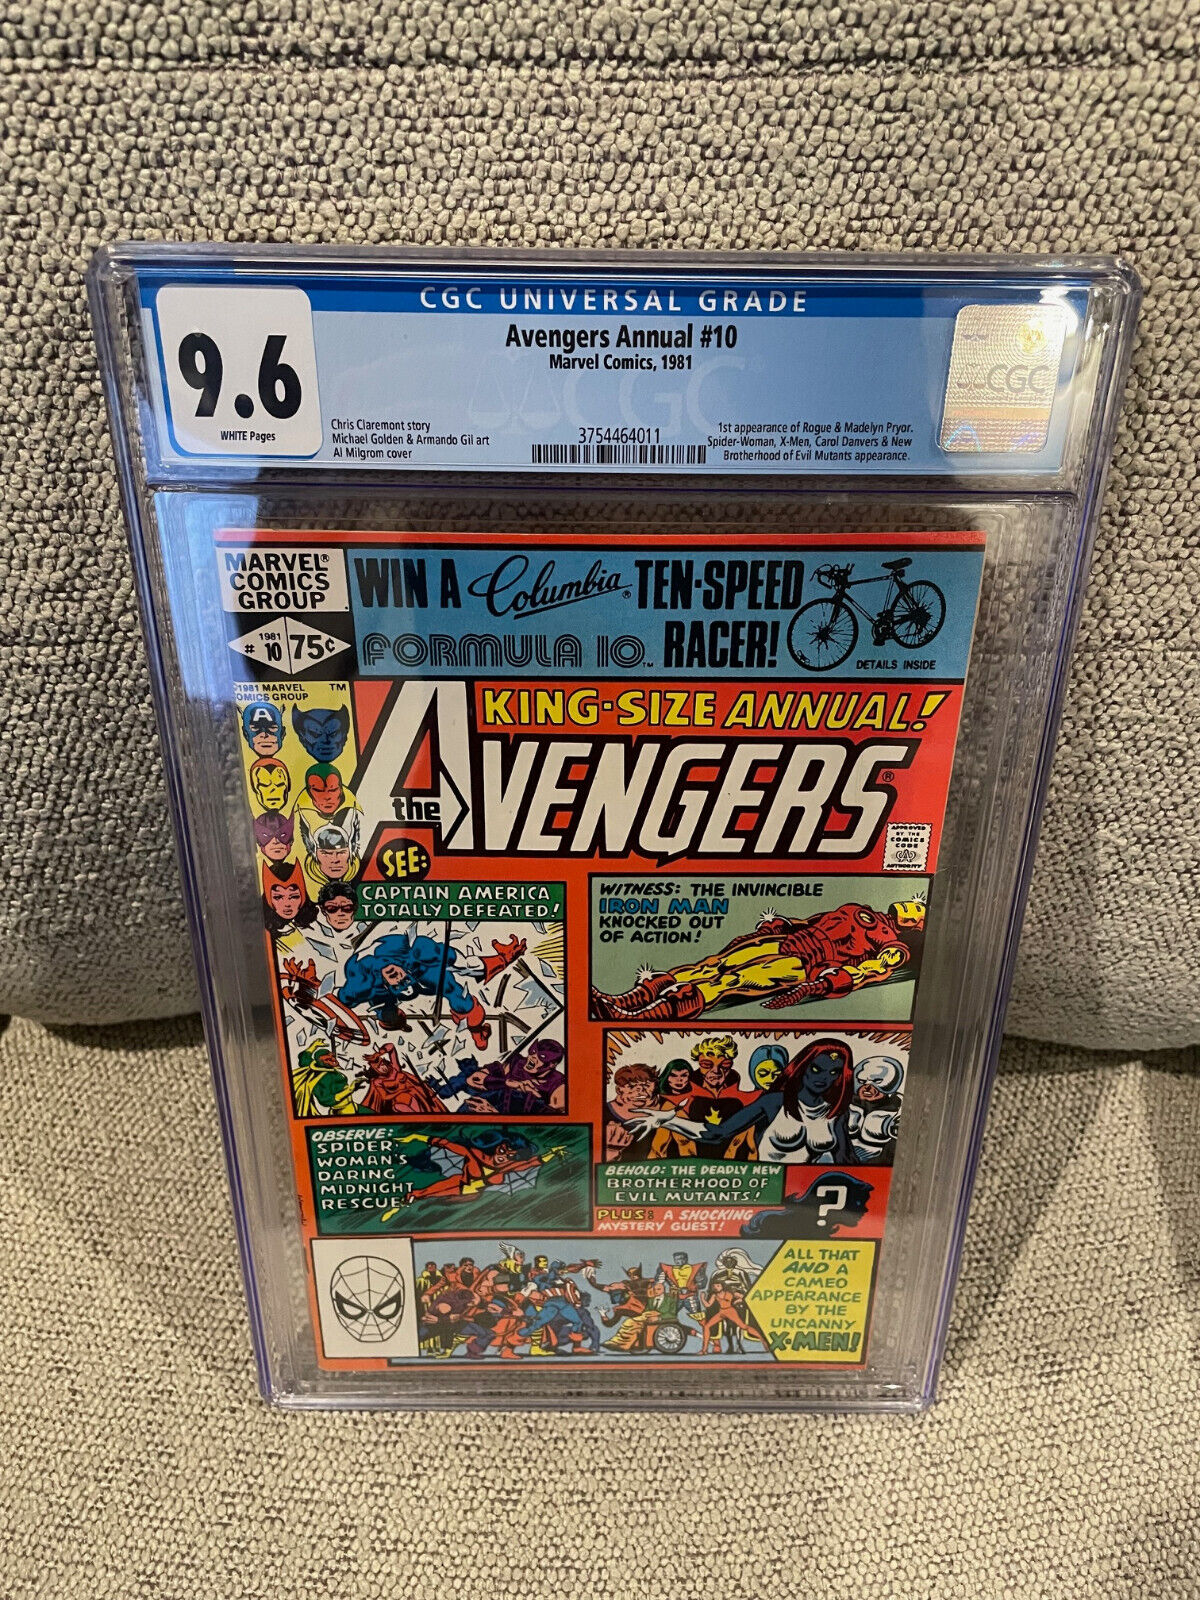 AVENGERS ANNUAL #10 CGC 9.6 2981 1ST APPEARANCE OF ROGUE KEY COMIC BOOK WHITE PG